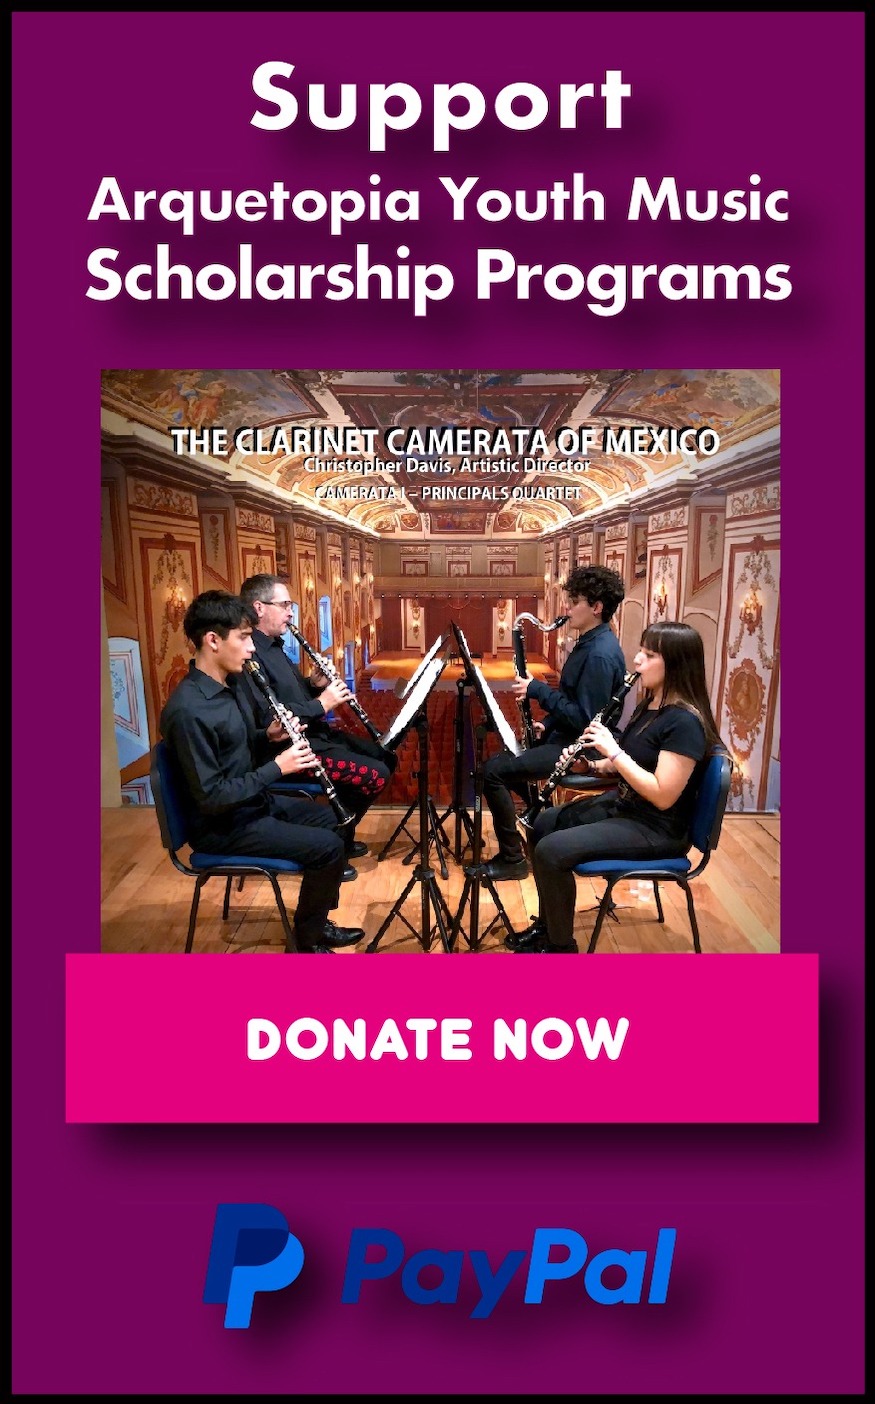 Support Arquetopia Youth Music Scholarship Programs